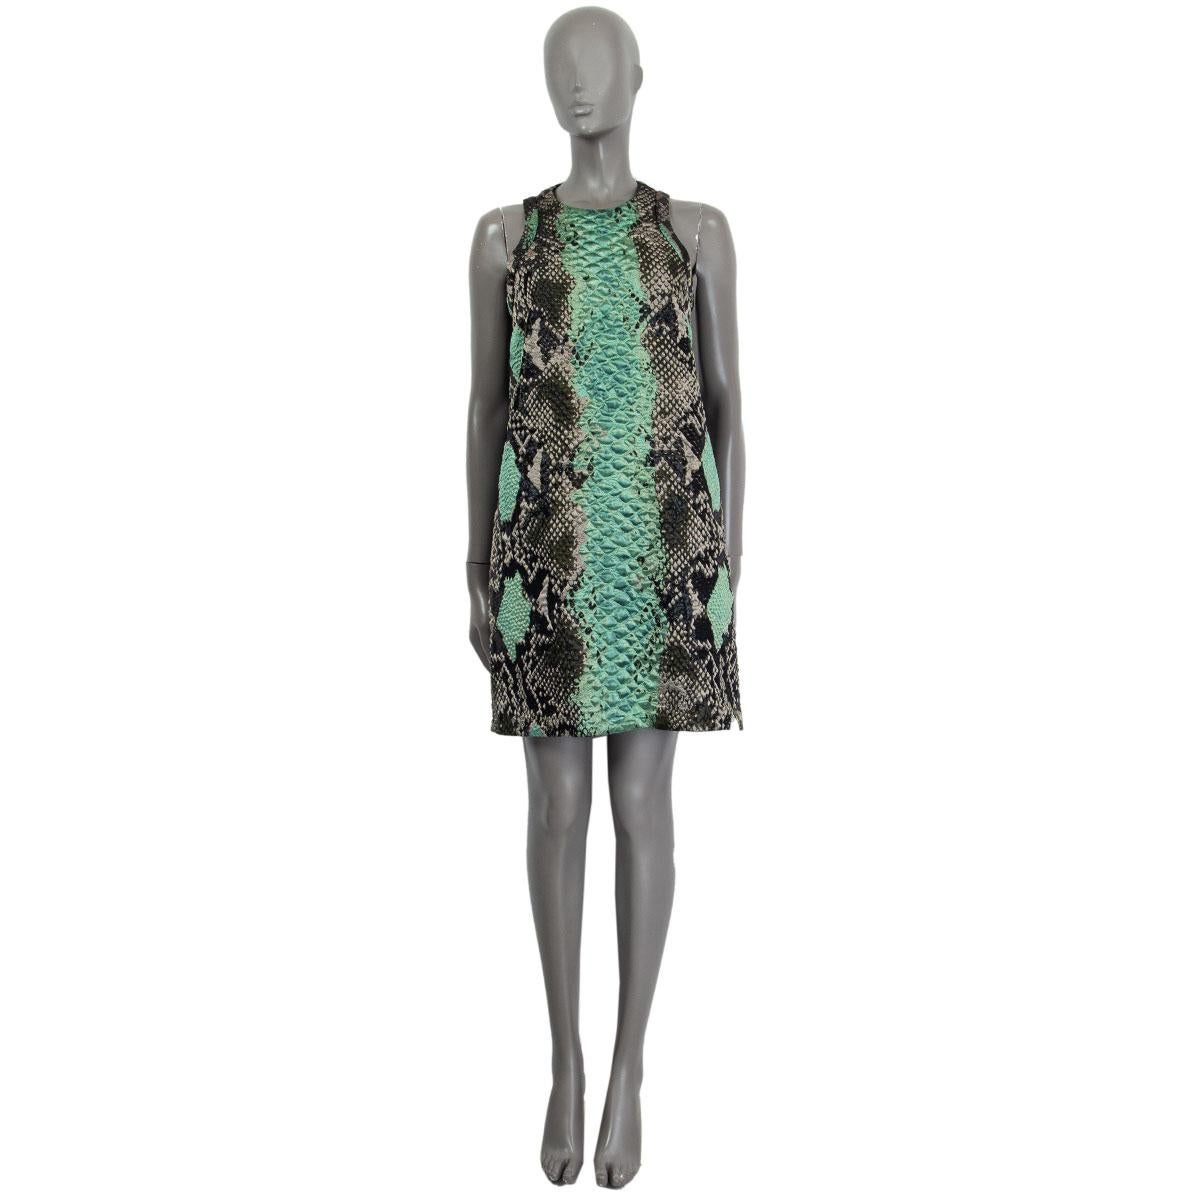 100% authentic Gucci sleeveless python print jacquard dress in black, turquoise and silver polyester (54%), acetate (30%), silk (12%) and polyamide (4%) with a round neckline. Fabric has a metallic sheen to it. Closes on the back with a zipper.